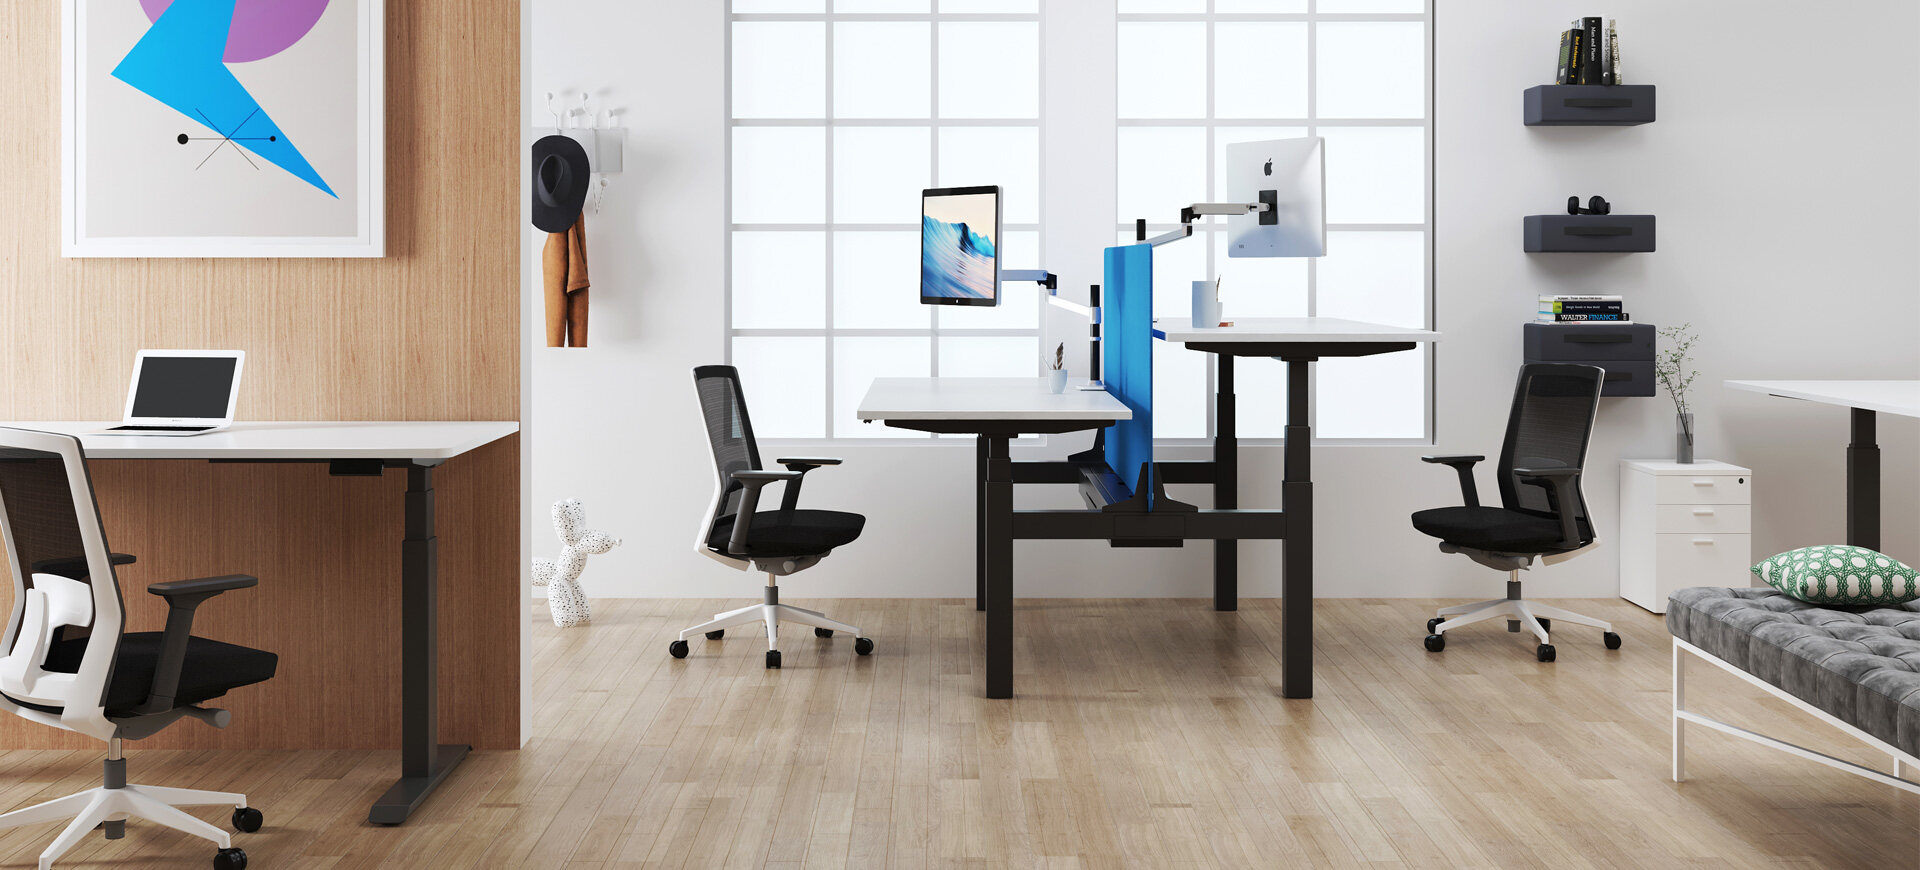 Sit_or_stand_desk-_BANNER-Double_Sit-to-Stand_Tables-1.jpg